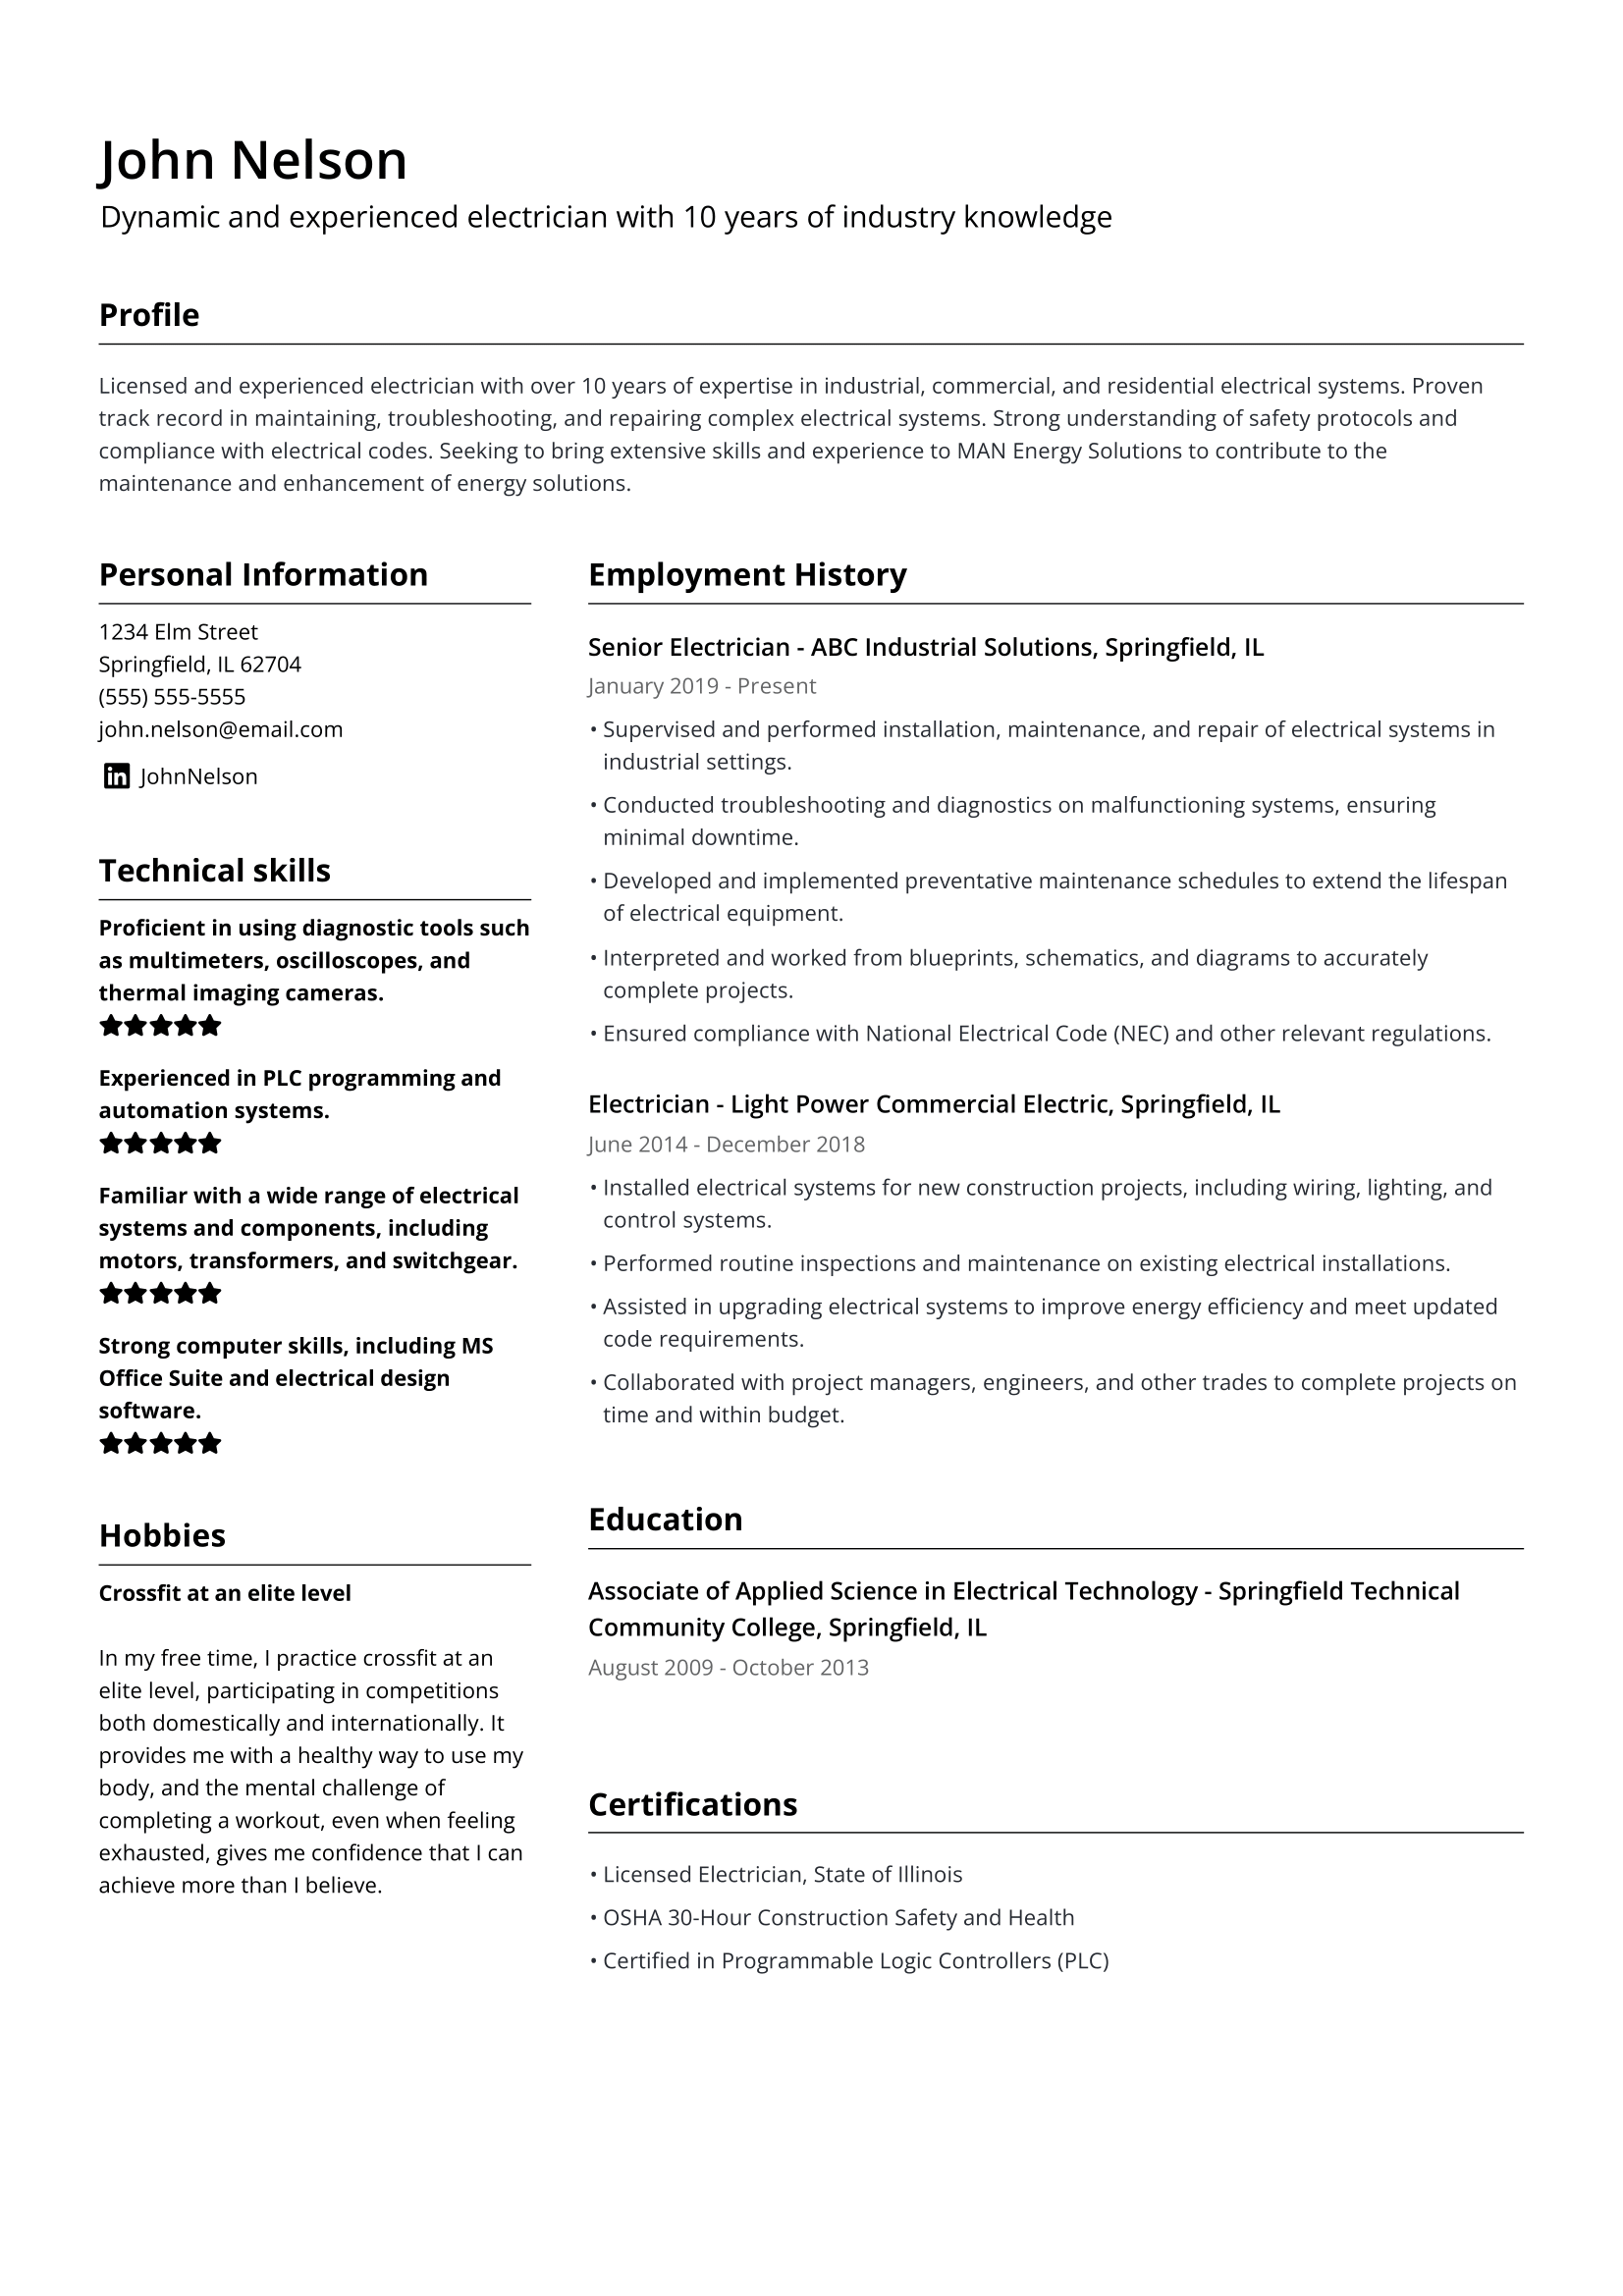 Image of a two-column resume setup example from Jofibo